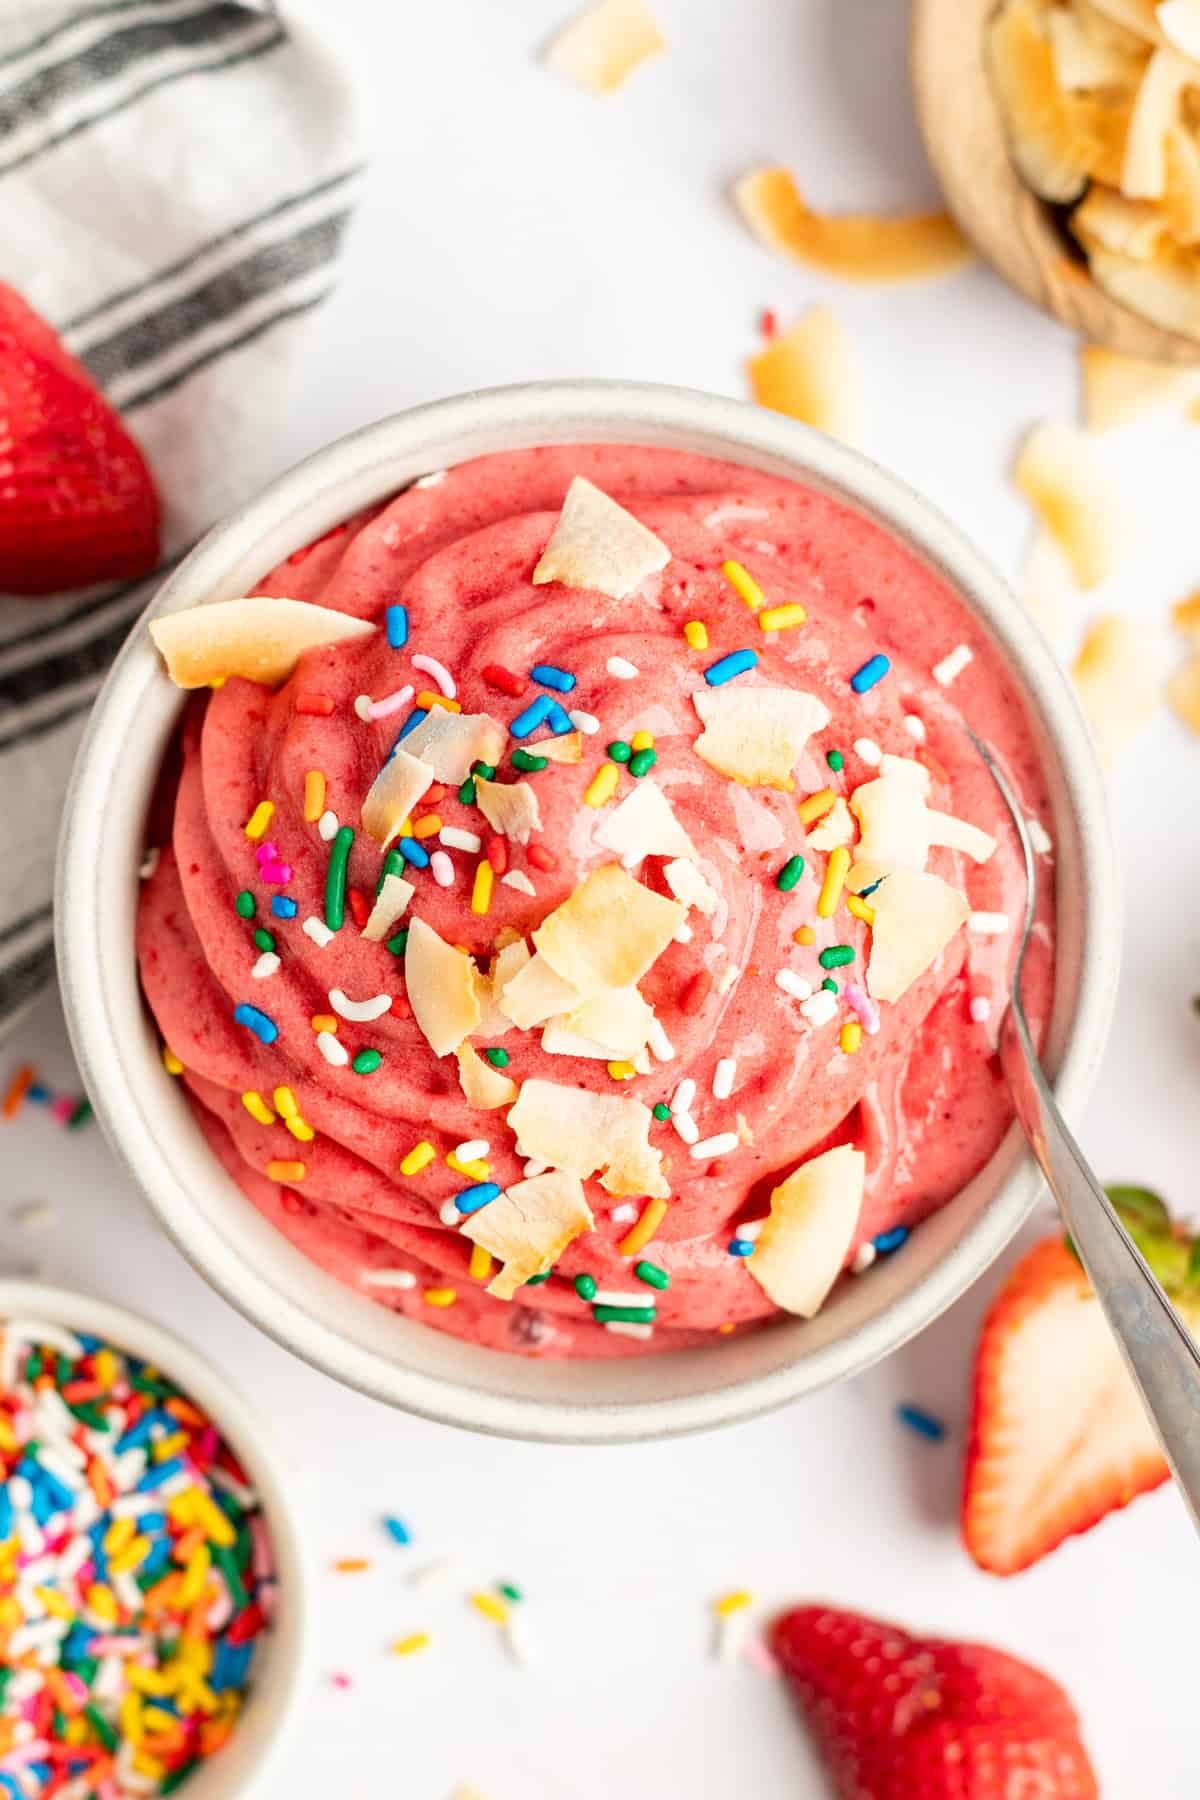 A vibrant pink smoothie bowl topped with coconut flakes and rainbow sprinkles, accompanied by fresh strawberries and a spoon.